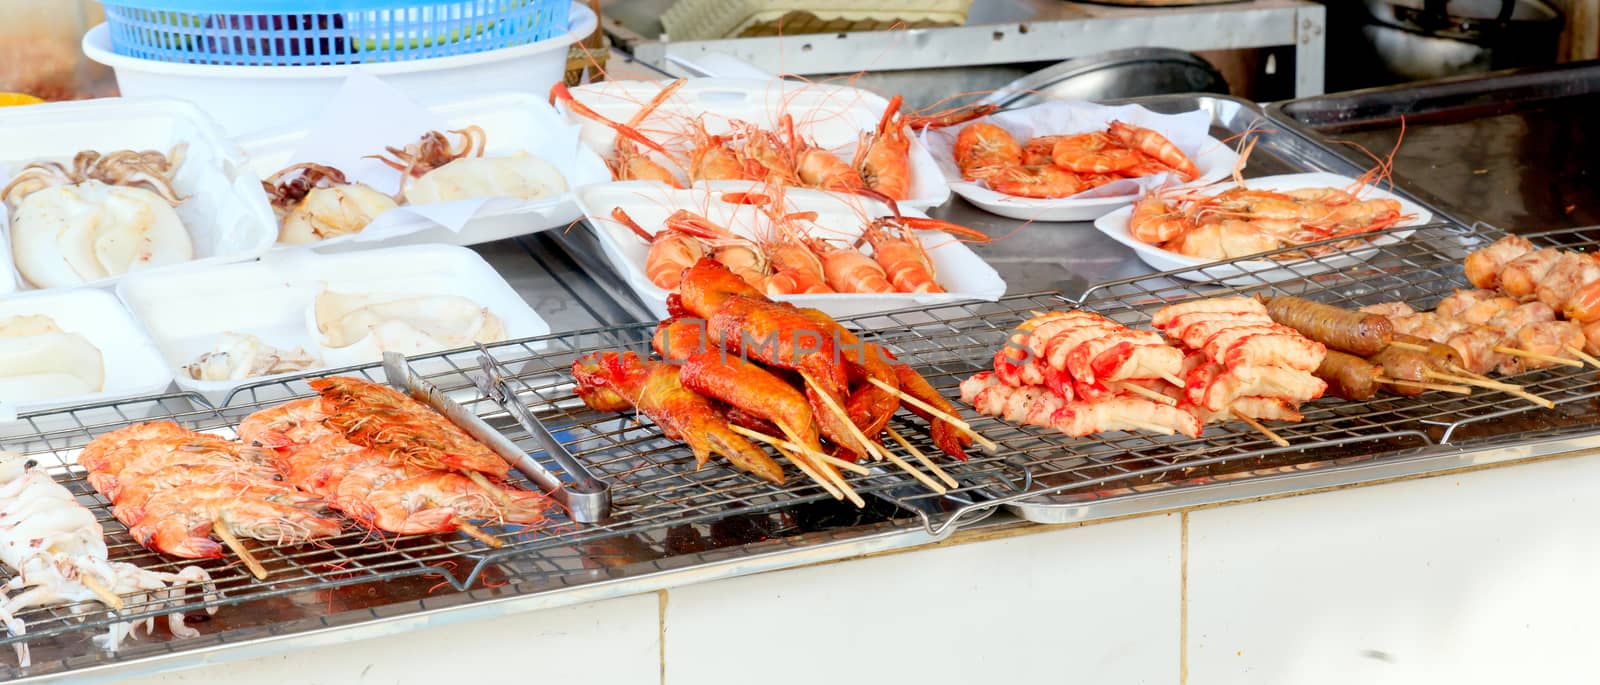 Shrimp, squid, meatball and chicken skewers on the grill for sale.